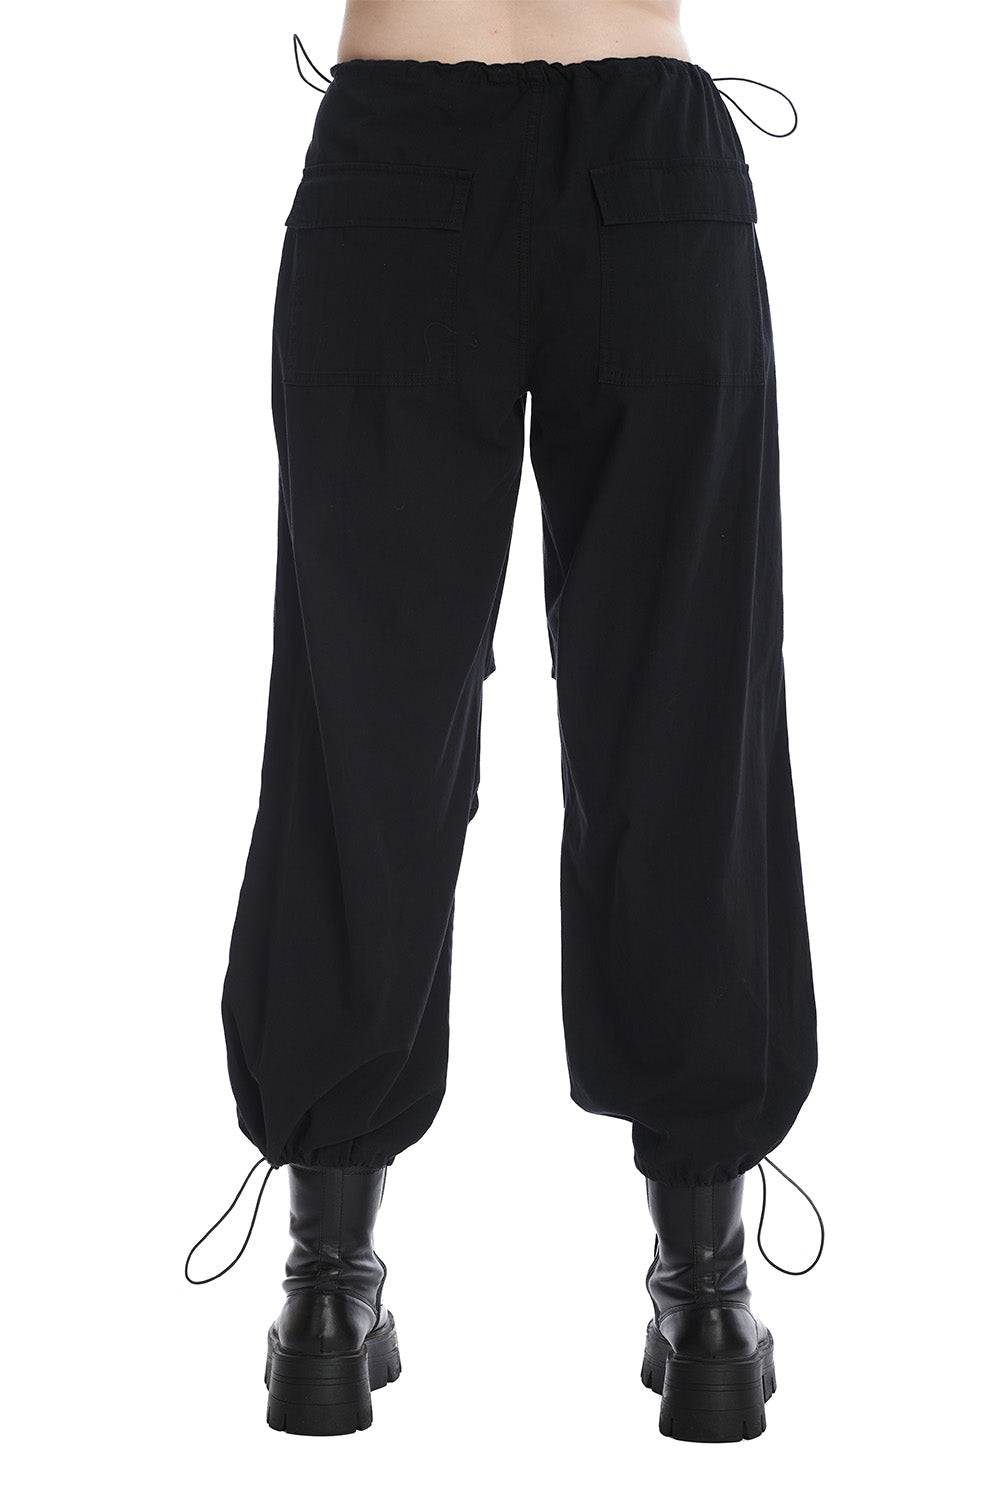 Banned Alternative NYX WIDE LEG TROUSERS